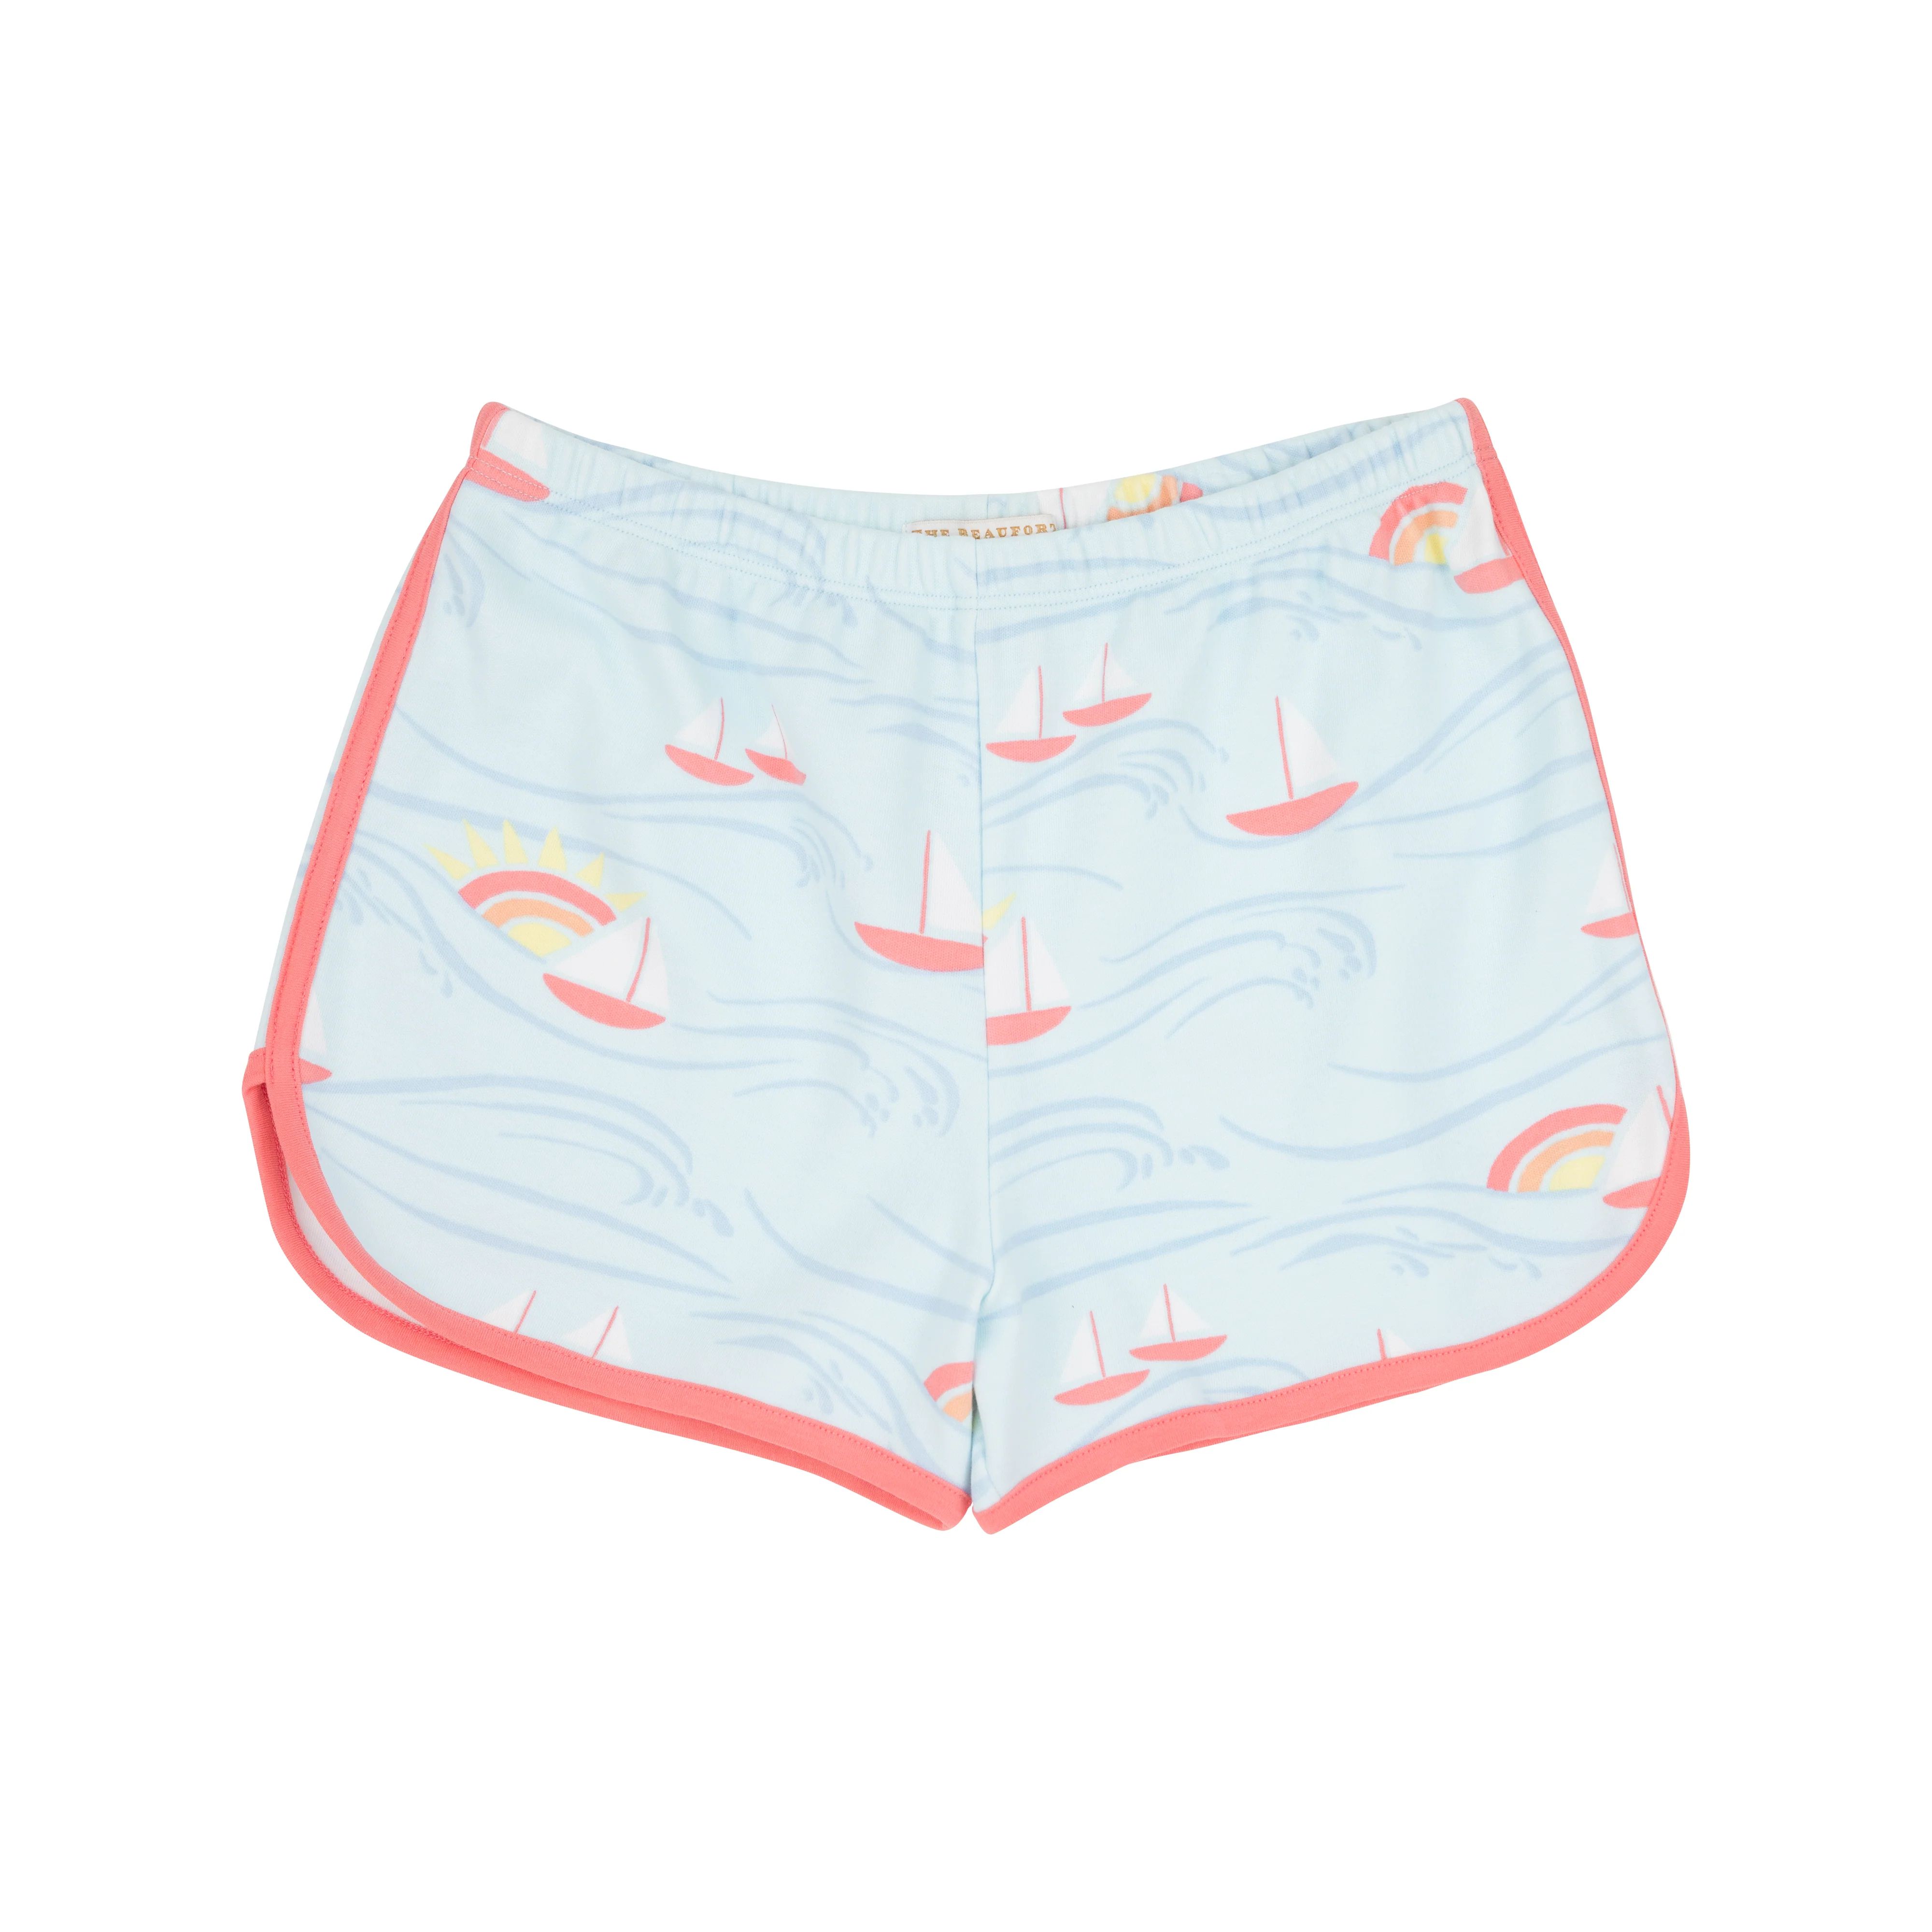 Cheryl Shorts - Wave Hello to the Sun with Parrot Cay Coral | The Beaufort Bonnet Company